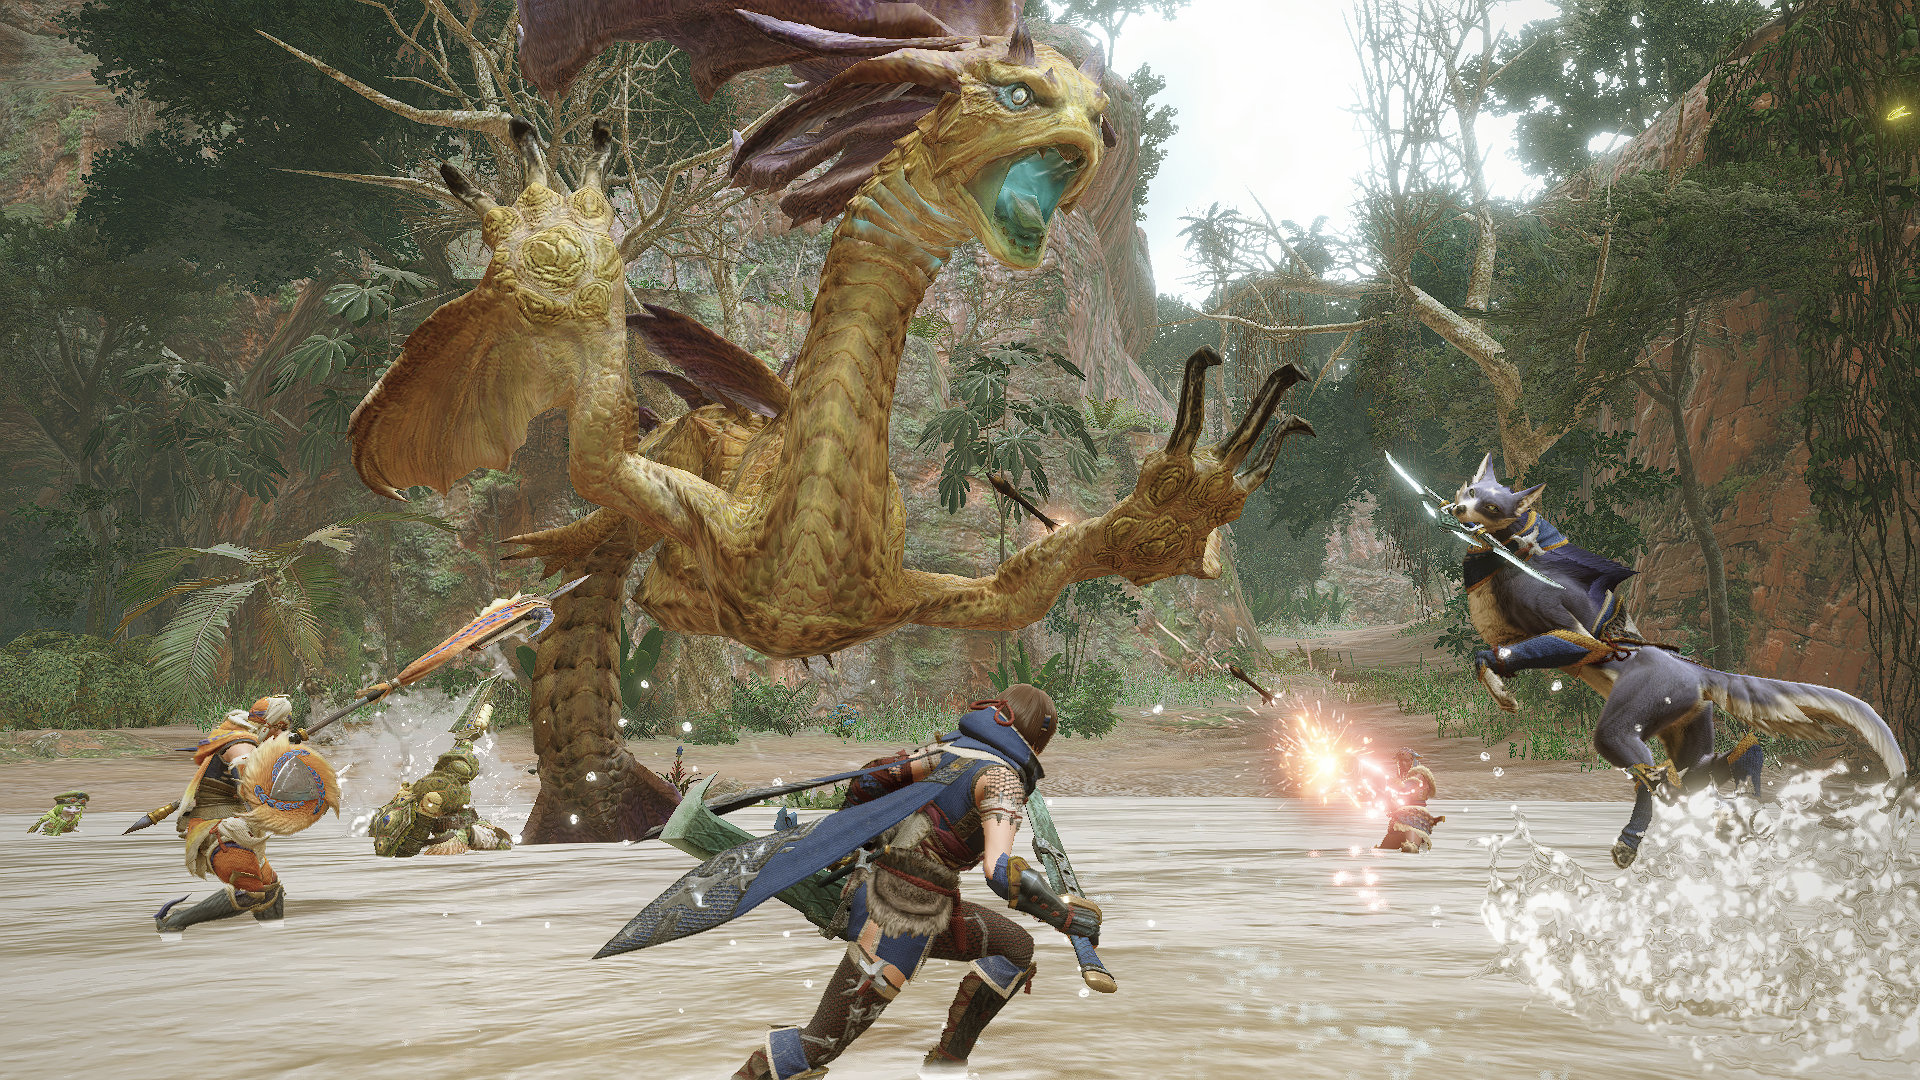 Latest Monster Hunter Rise Trailer Debuts Two New Monsters, Demo